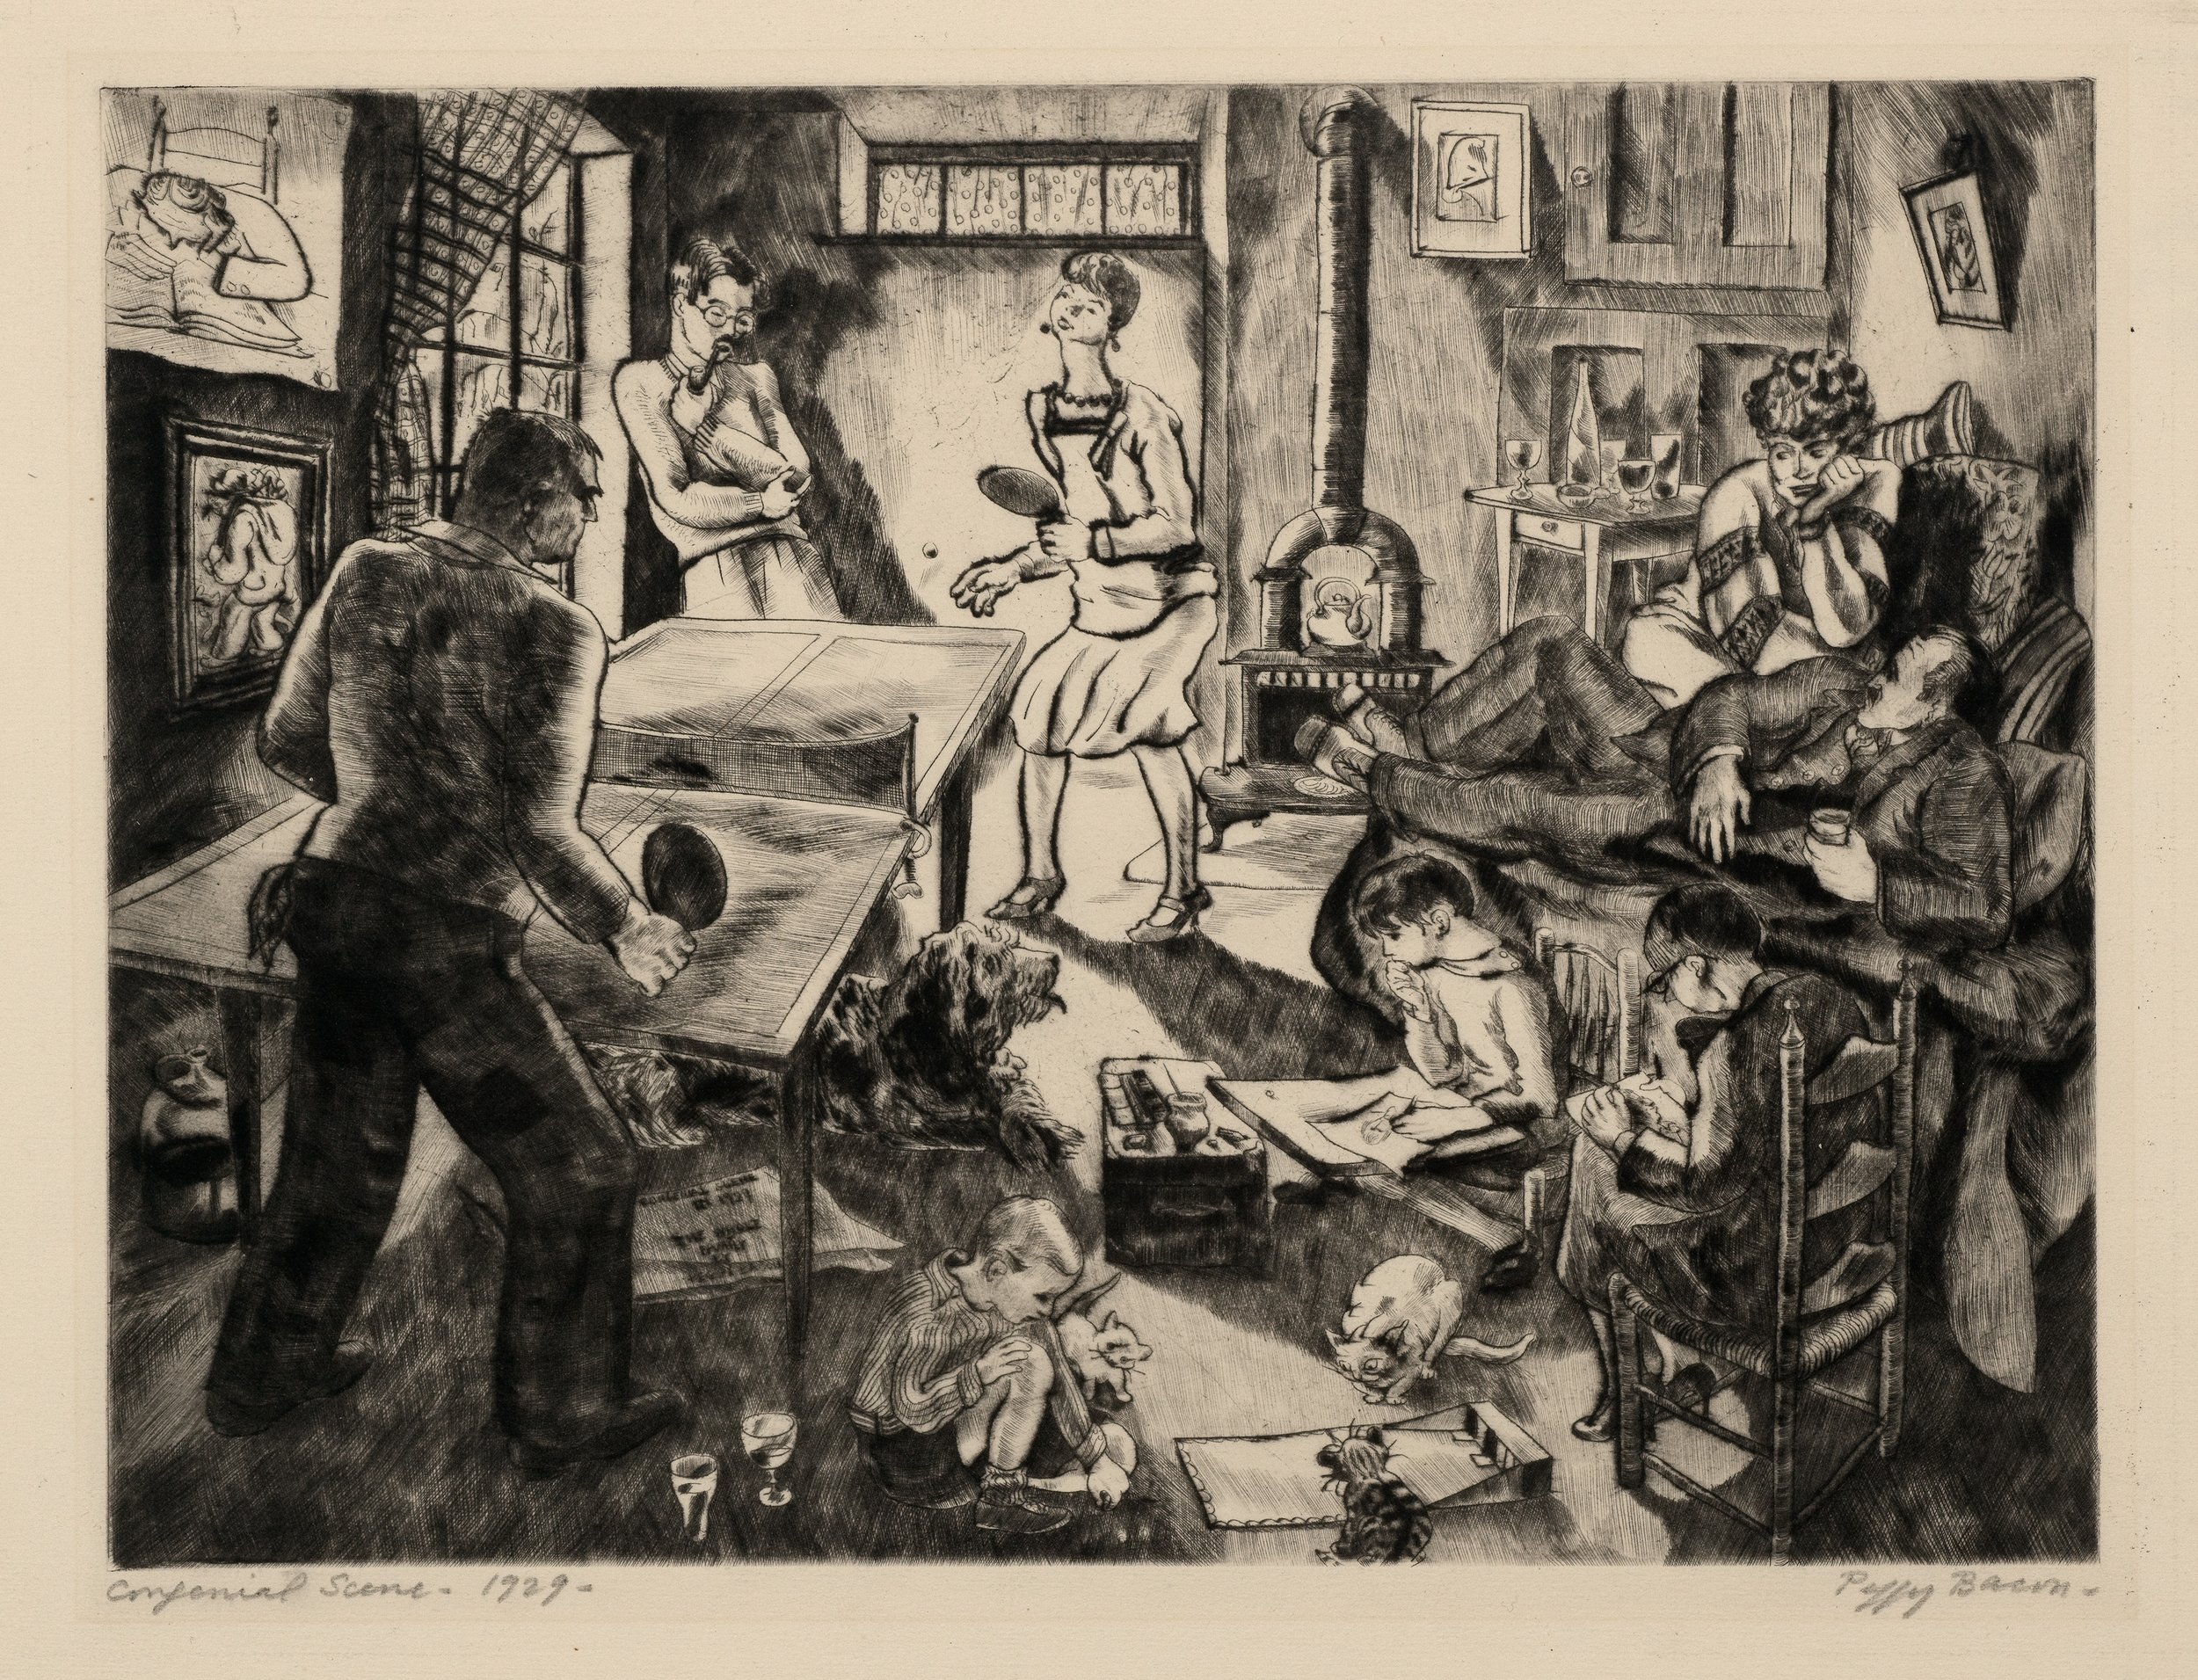  Peggy Bacon (United States, 1895–1987),  Congenial Scene , 1929, drypoint on wove paper, 8 15/16 x 11 7/8 inches. Gift of Harold Shaw, 1984.391. Image courtesy Petegorsky/Gipe Photo 